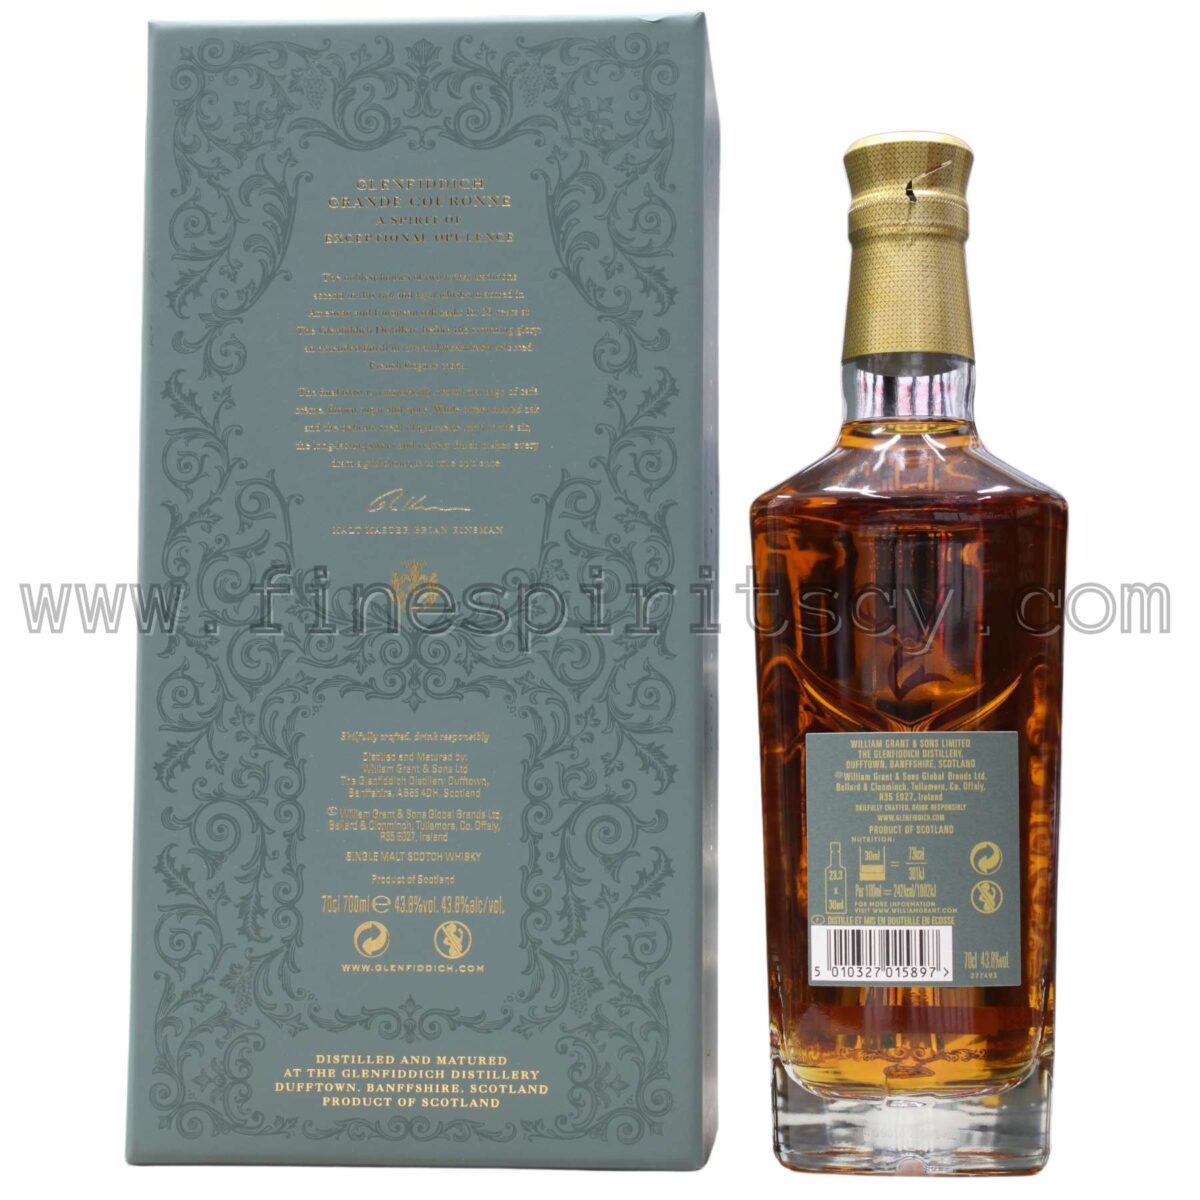 Glenfiddich 26 Y/O Grande Couronne Back Box Bottle Price Order Collectable Limited Edition